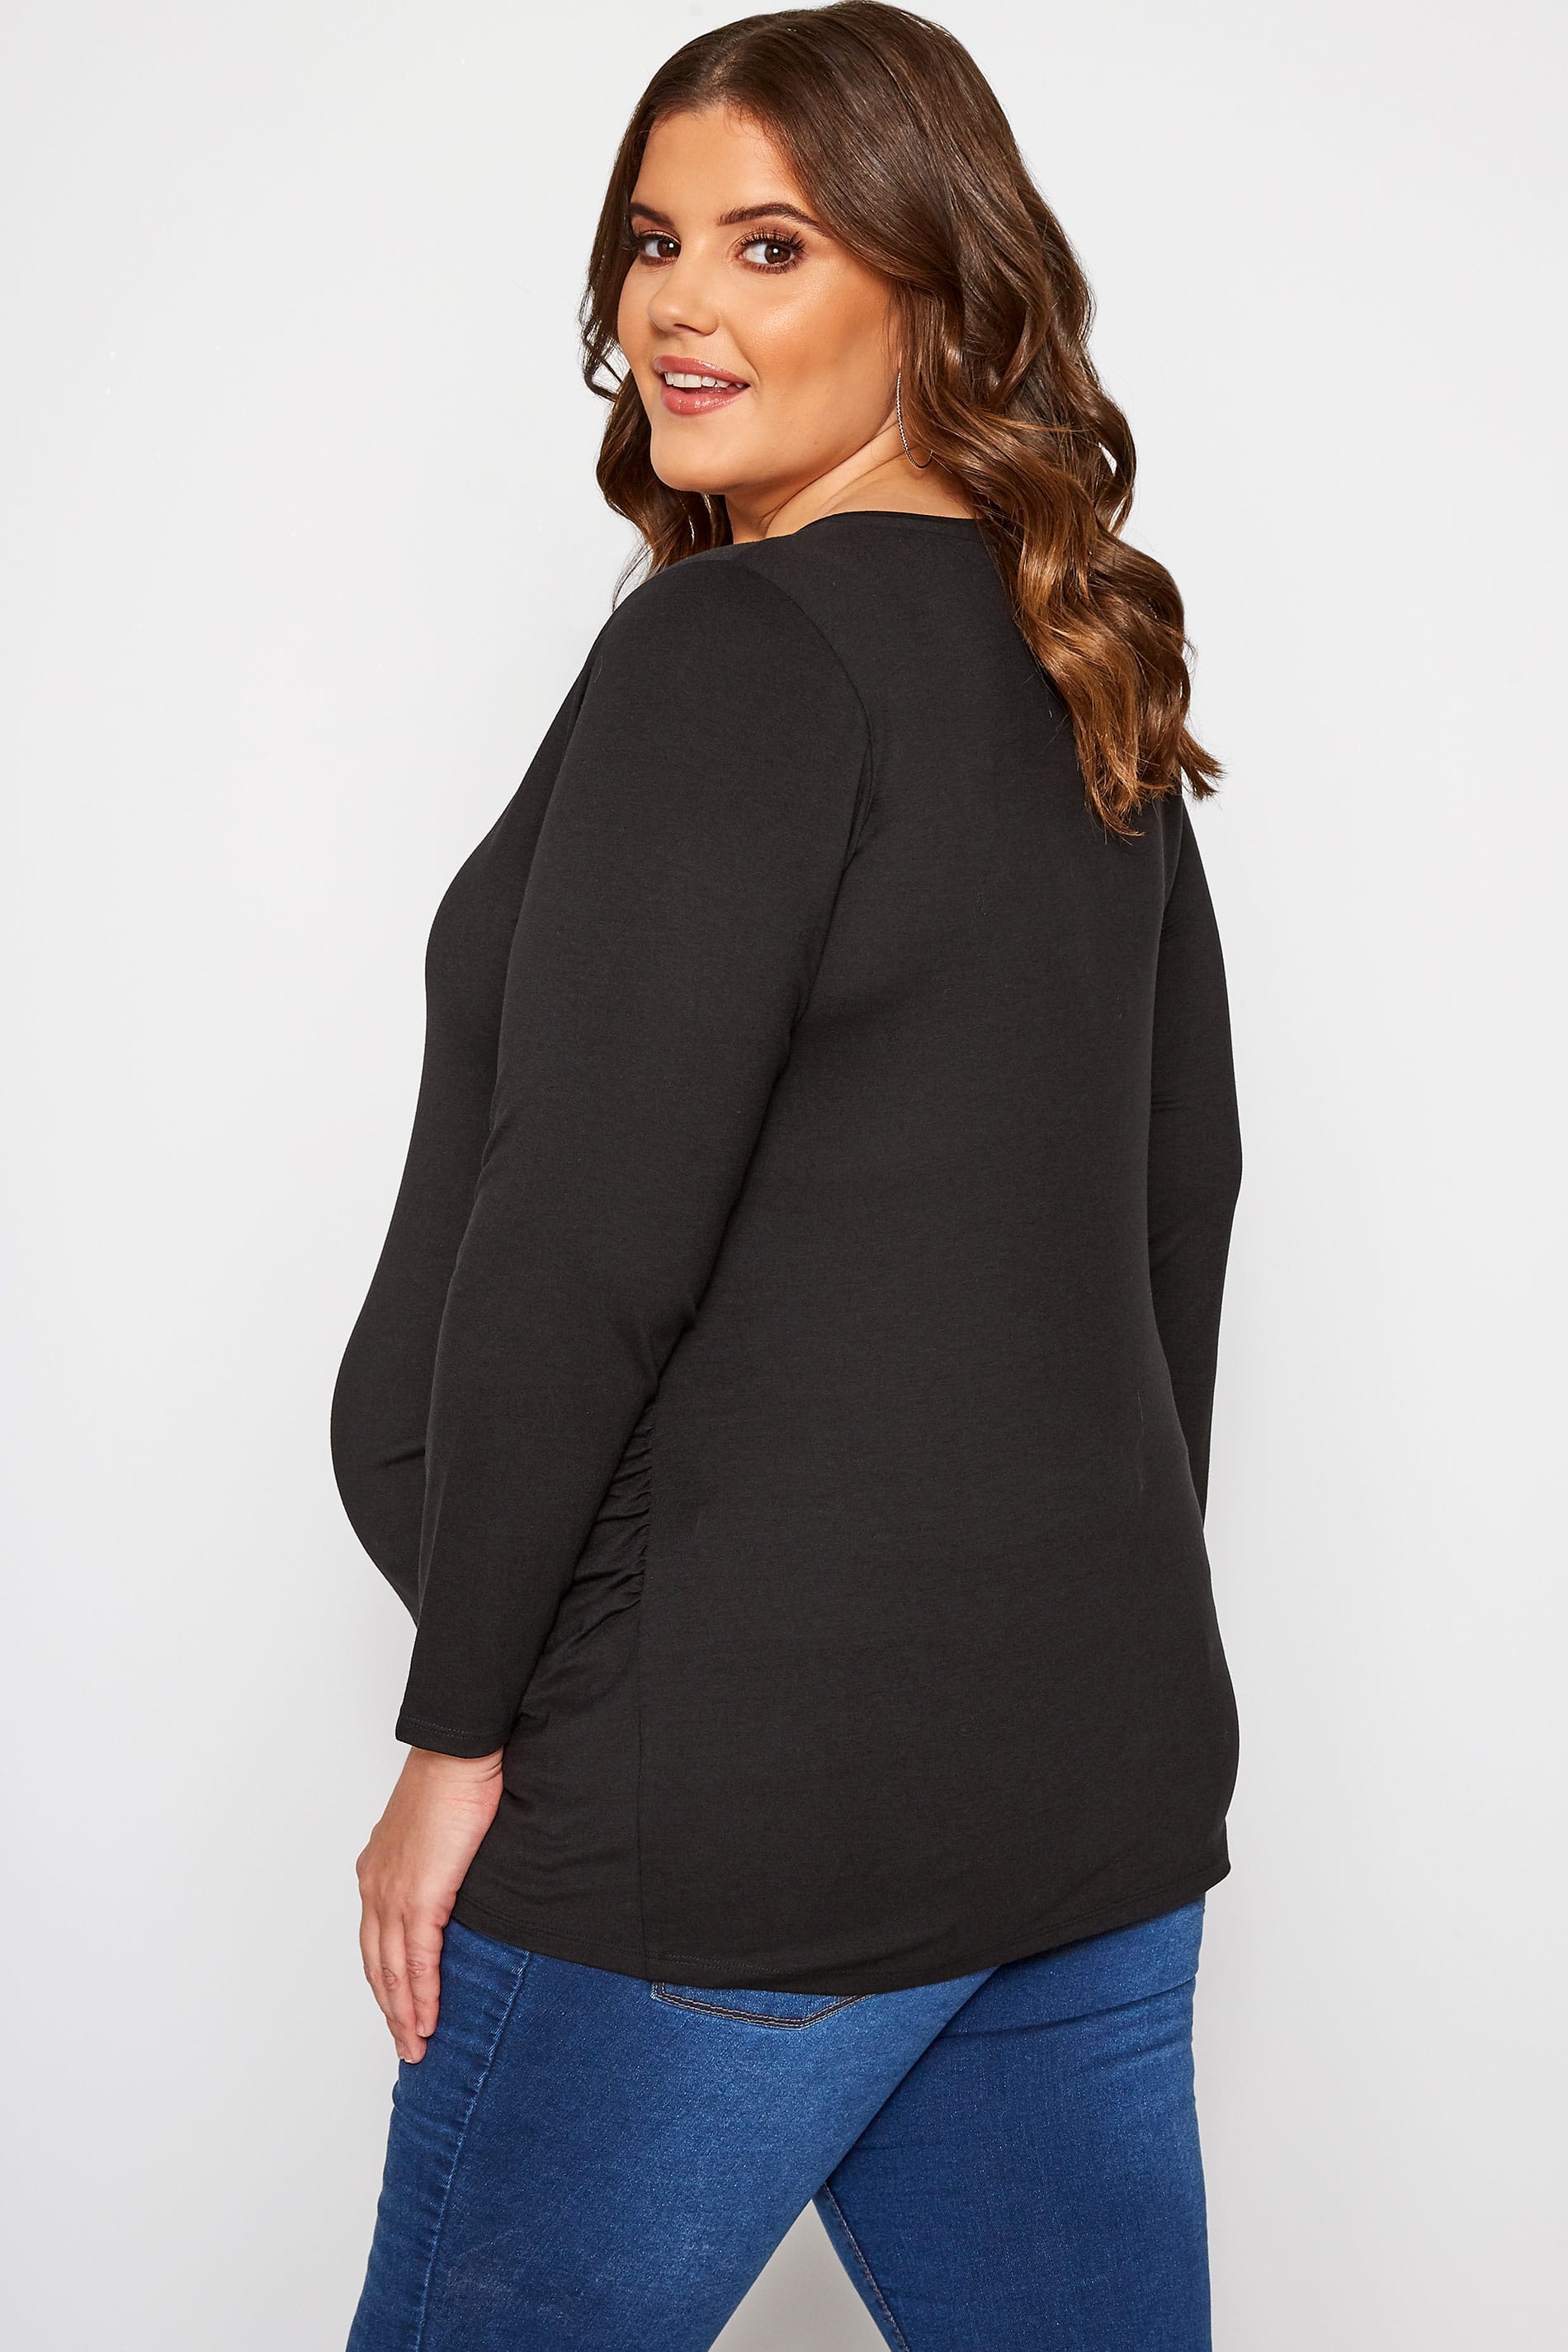 BUMP IT UP MATERNITY Black Lace Insert Top | Yours Clothing